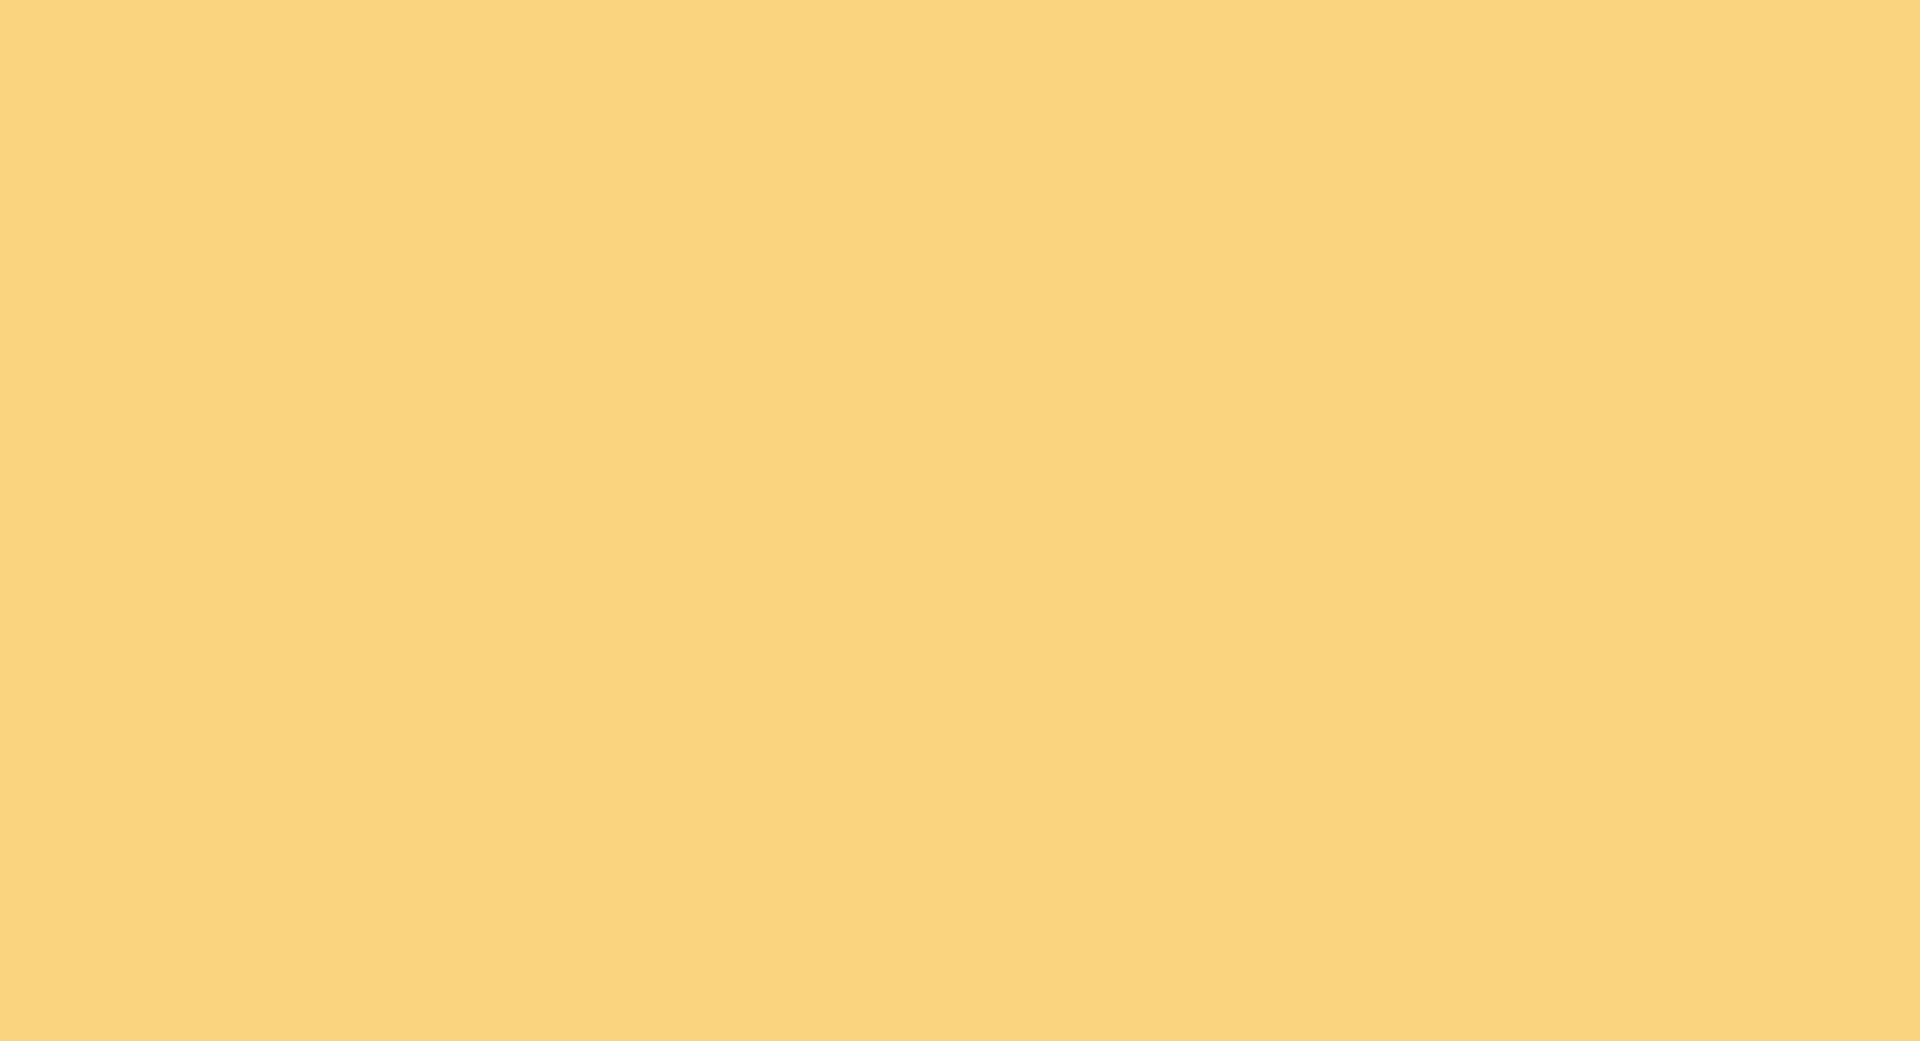 Butter Yellow Background Blank Meme Template